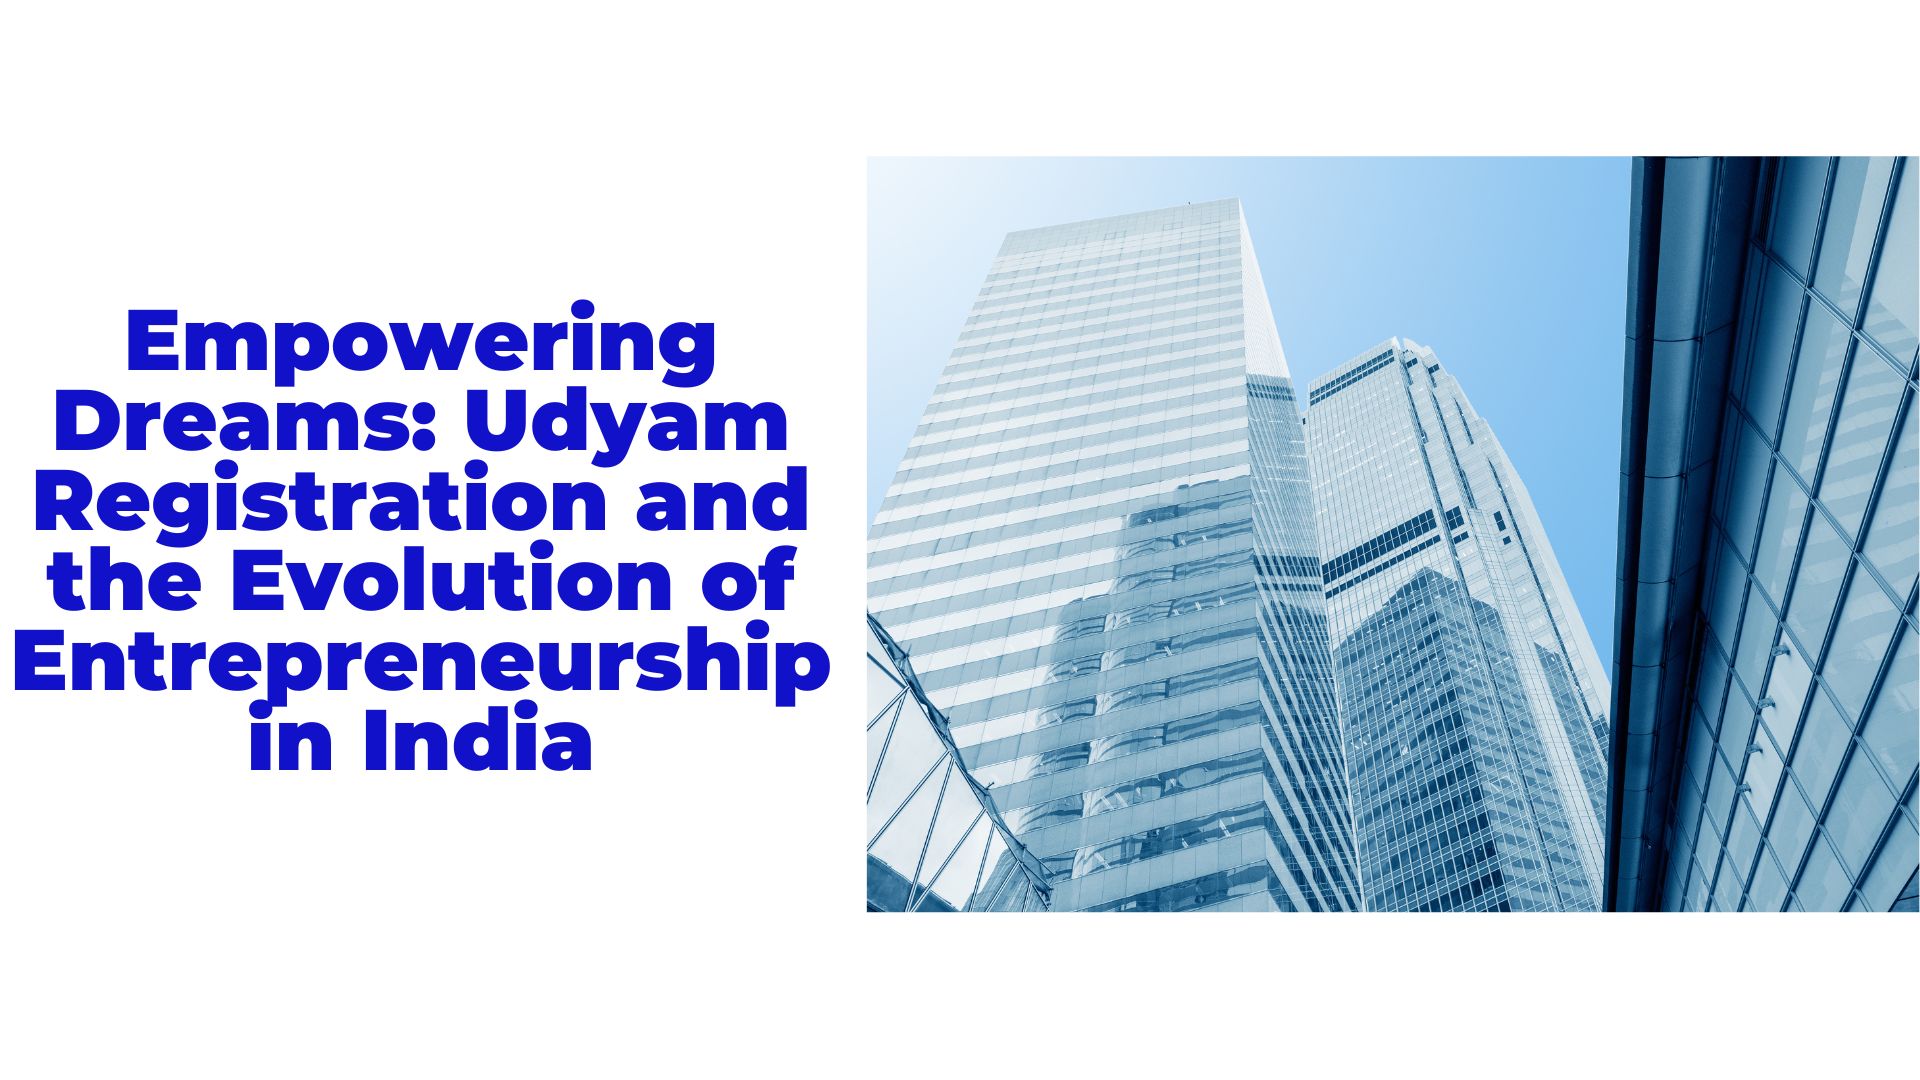 Empowering Dreams: Udyam Registration and the Evolution of Entrepreneurship in India